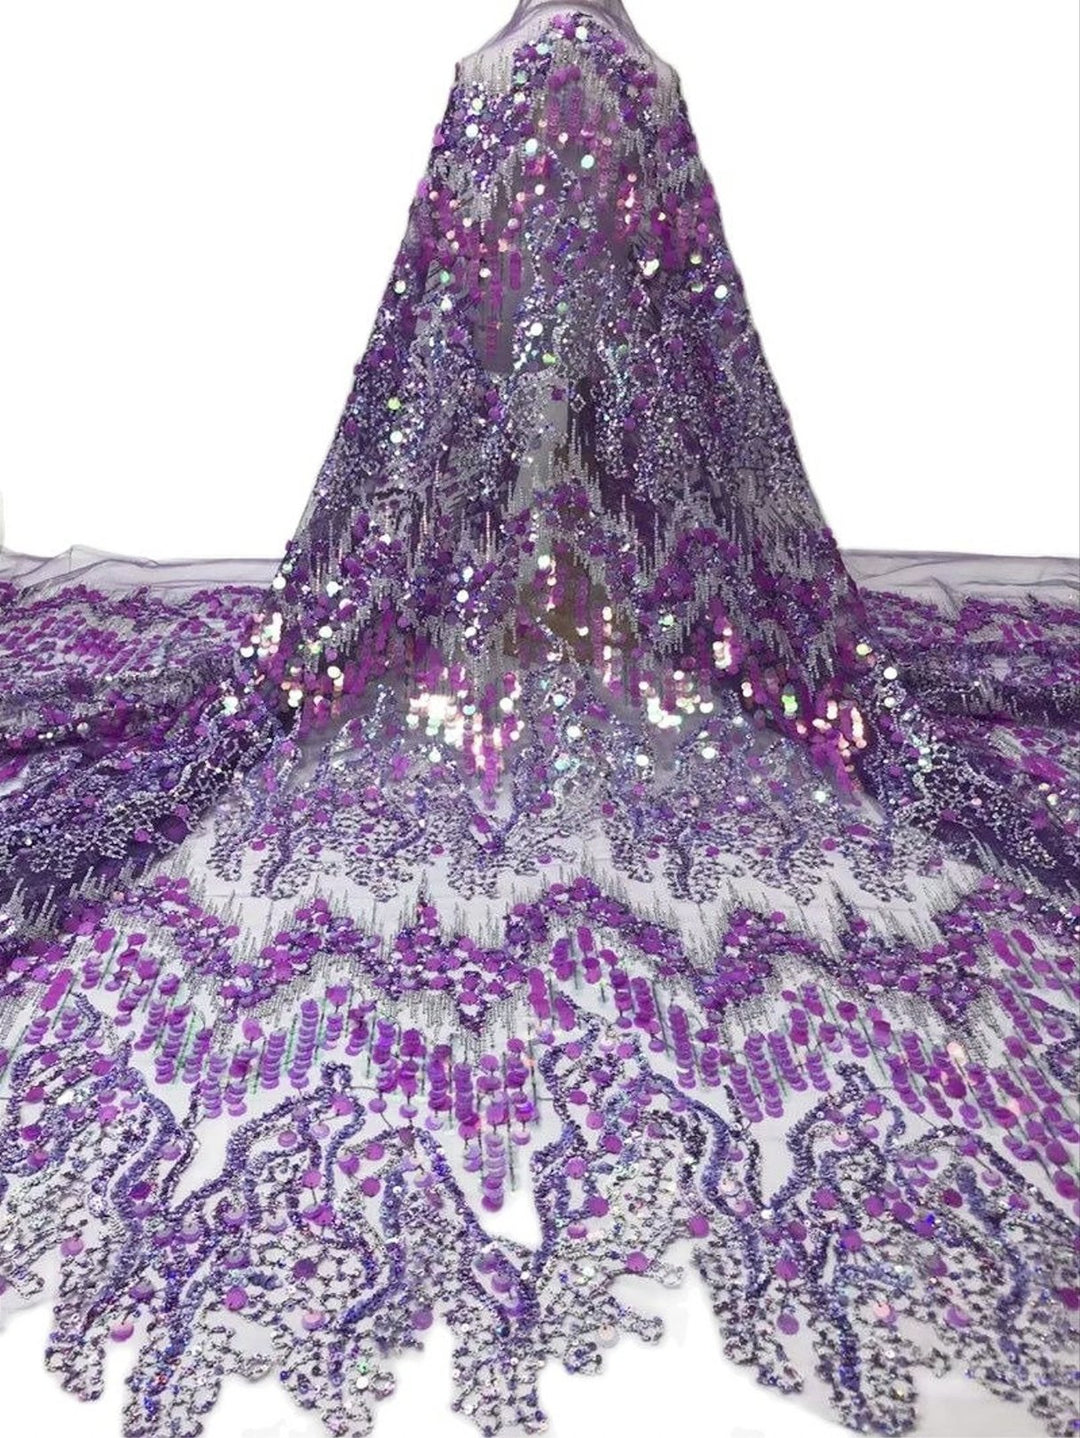 5 YARDS / 6 COLORS / Cosette Wave Design Sequin Beaded Glitter Embroidery Mesh Lace / Party Prom Bridal Dress Fabric